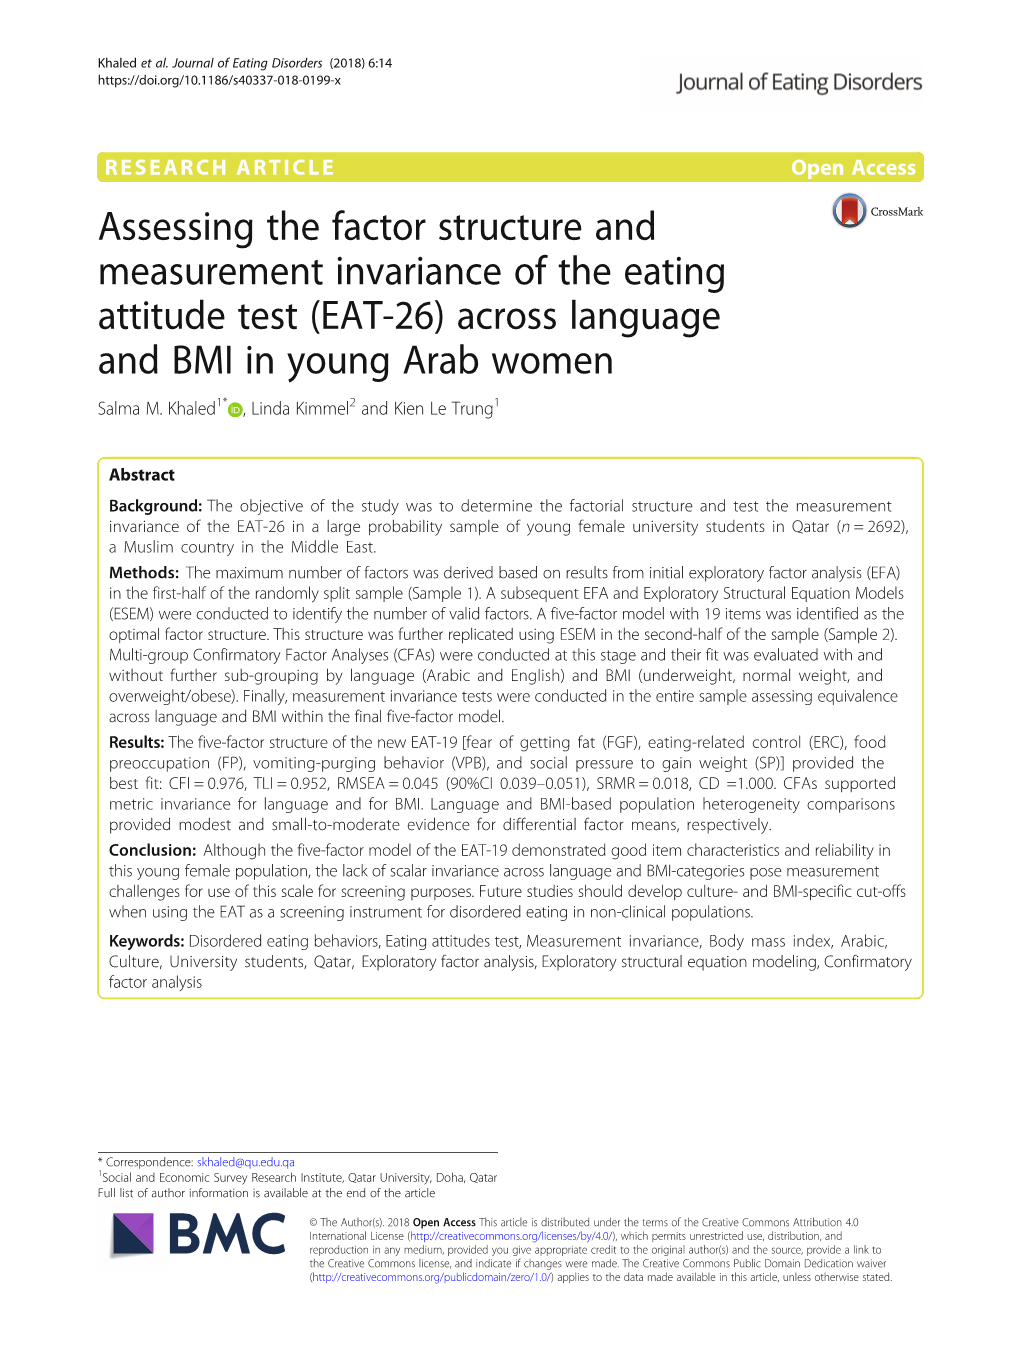 Assessing the Factor Structure and Measurement Invariance of the Eating Attitude Test (EAT-26) Across Language and BMI in Young Arab Women Salma M